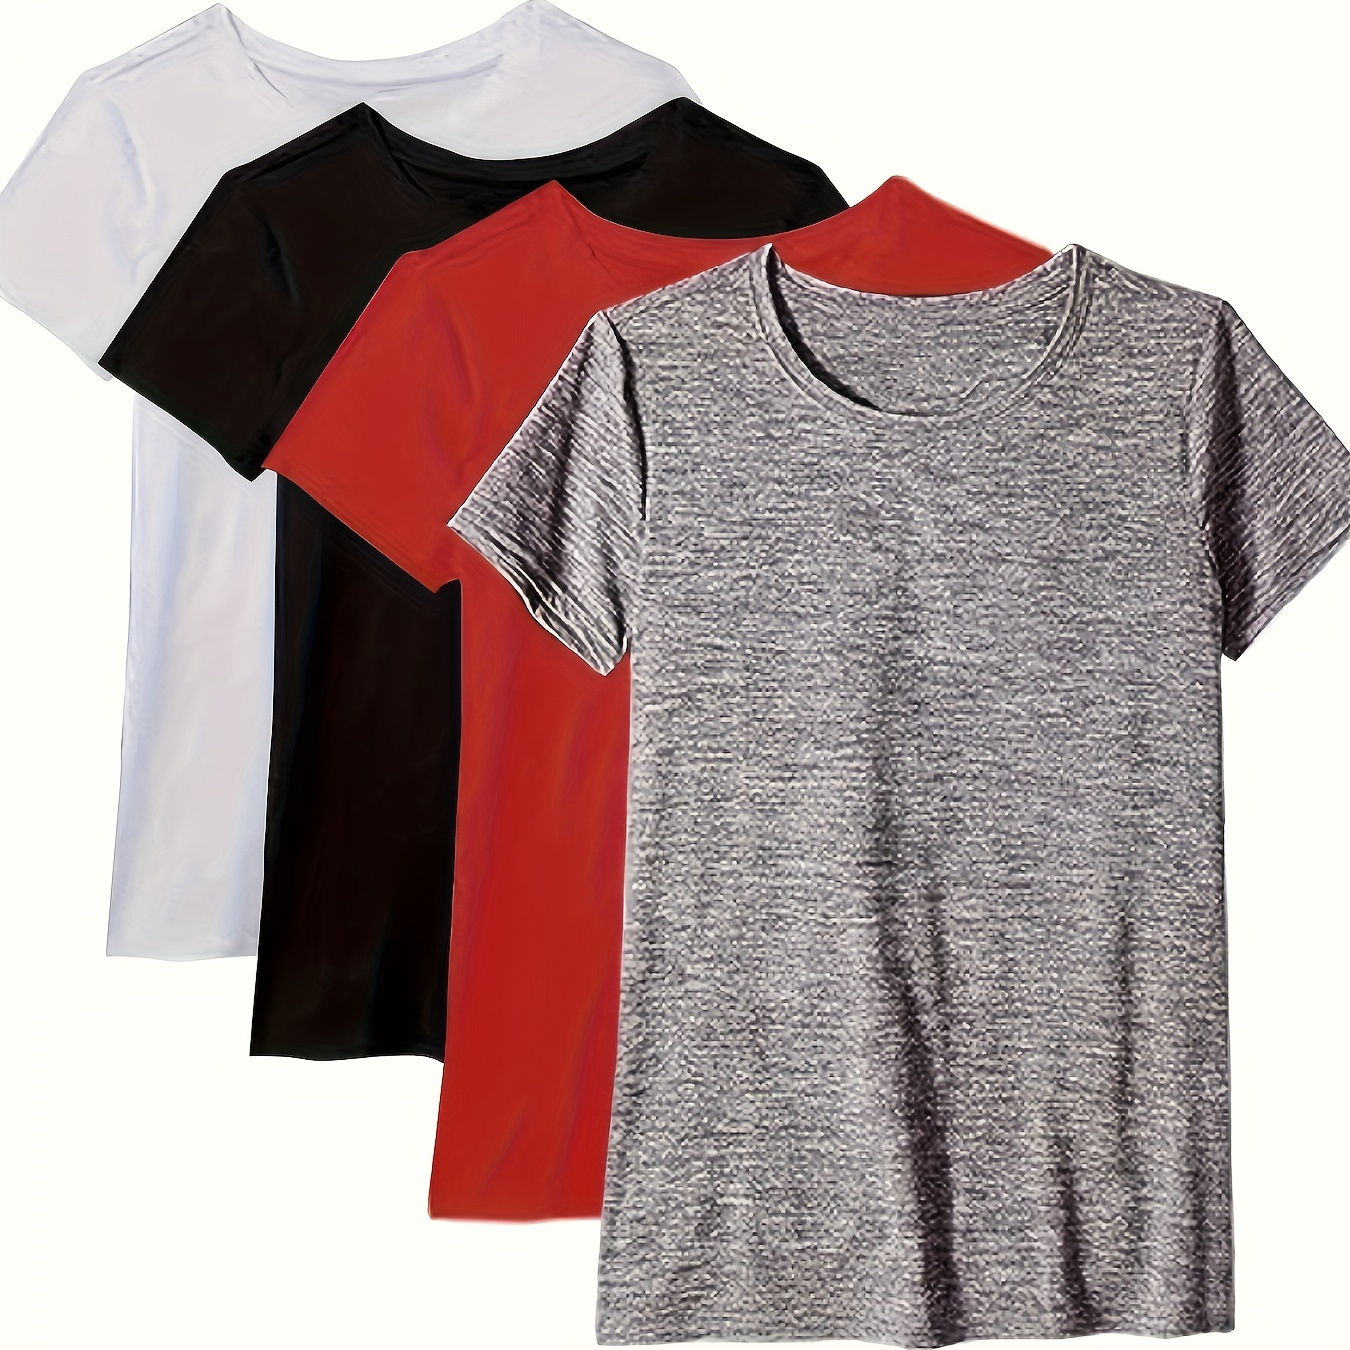 

4 Pcs Soft Comfortable Round Neck Short-sleeve T-shirts, Casual Loose Fit Tee-shirt Set In Assorted Colors